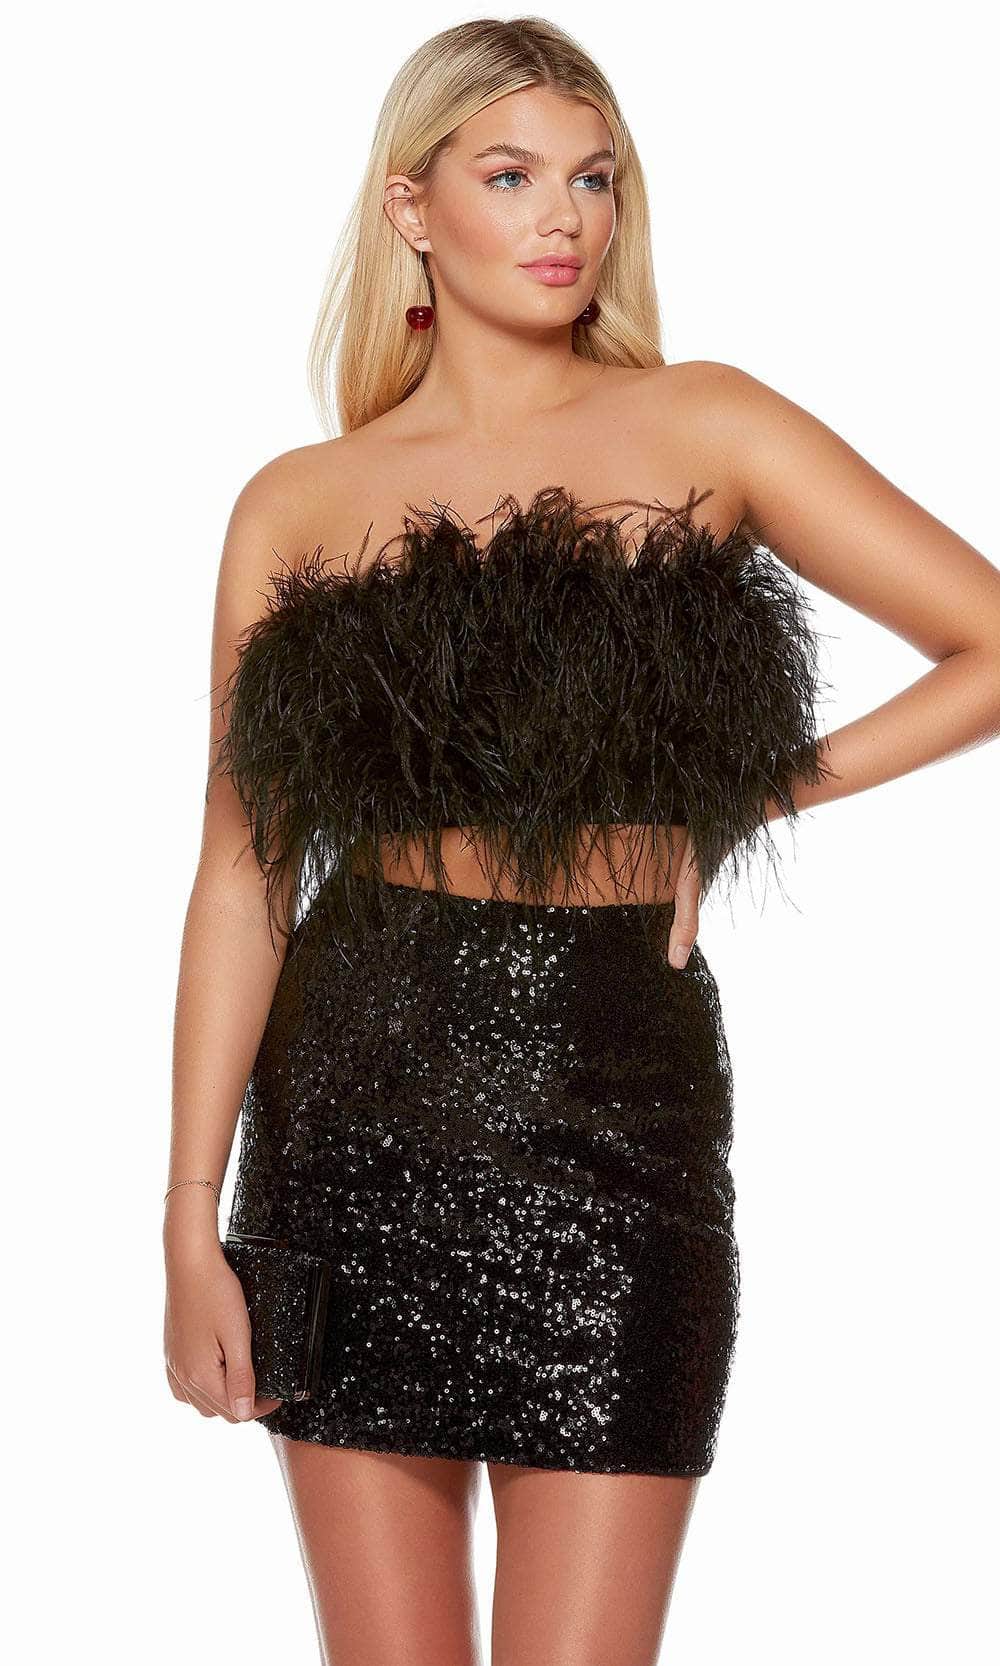 Alyce Paris 4791 - Feather Embellished Strapless Cocktail Dress
